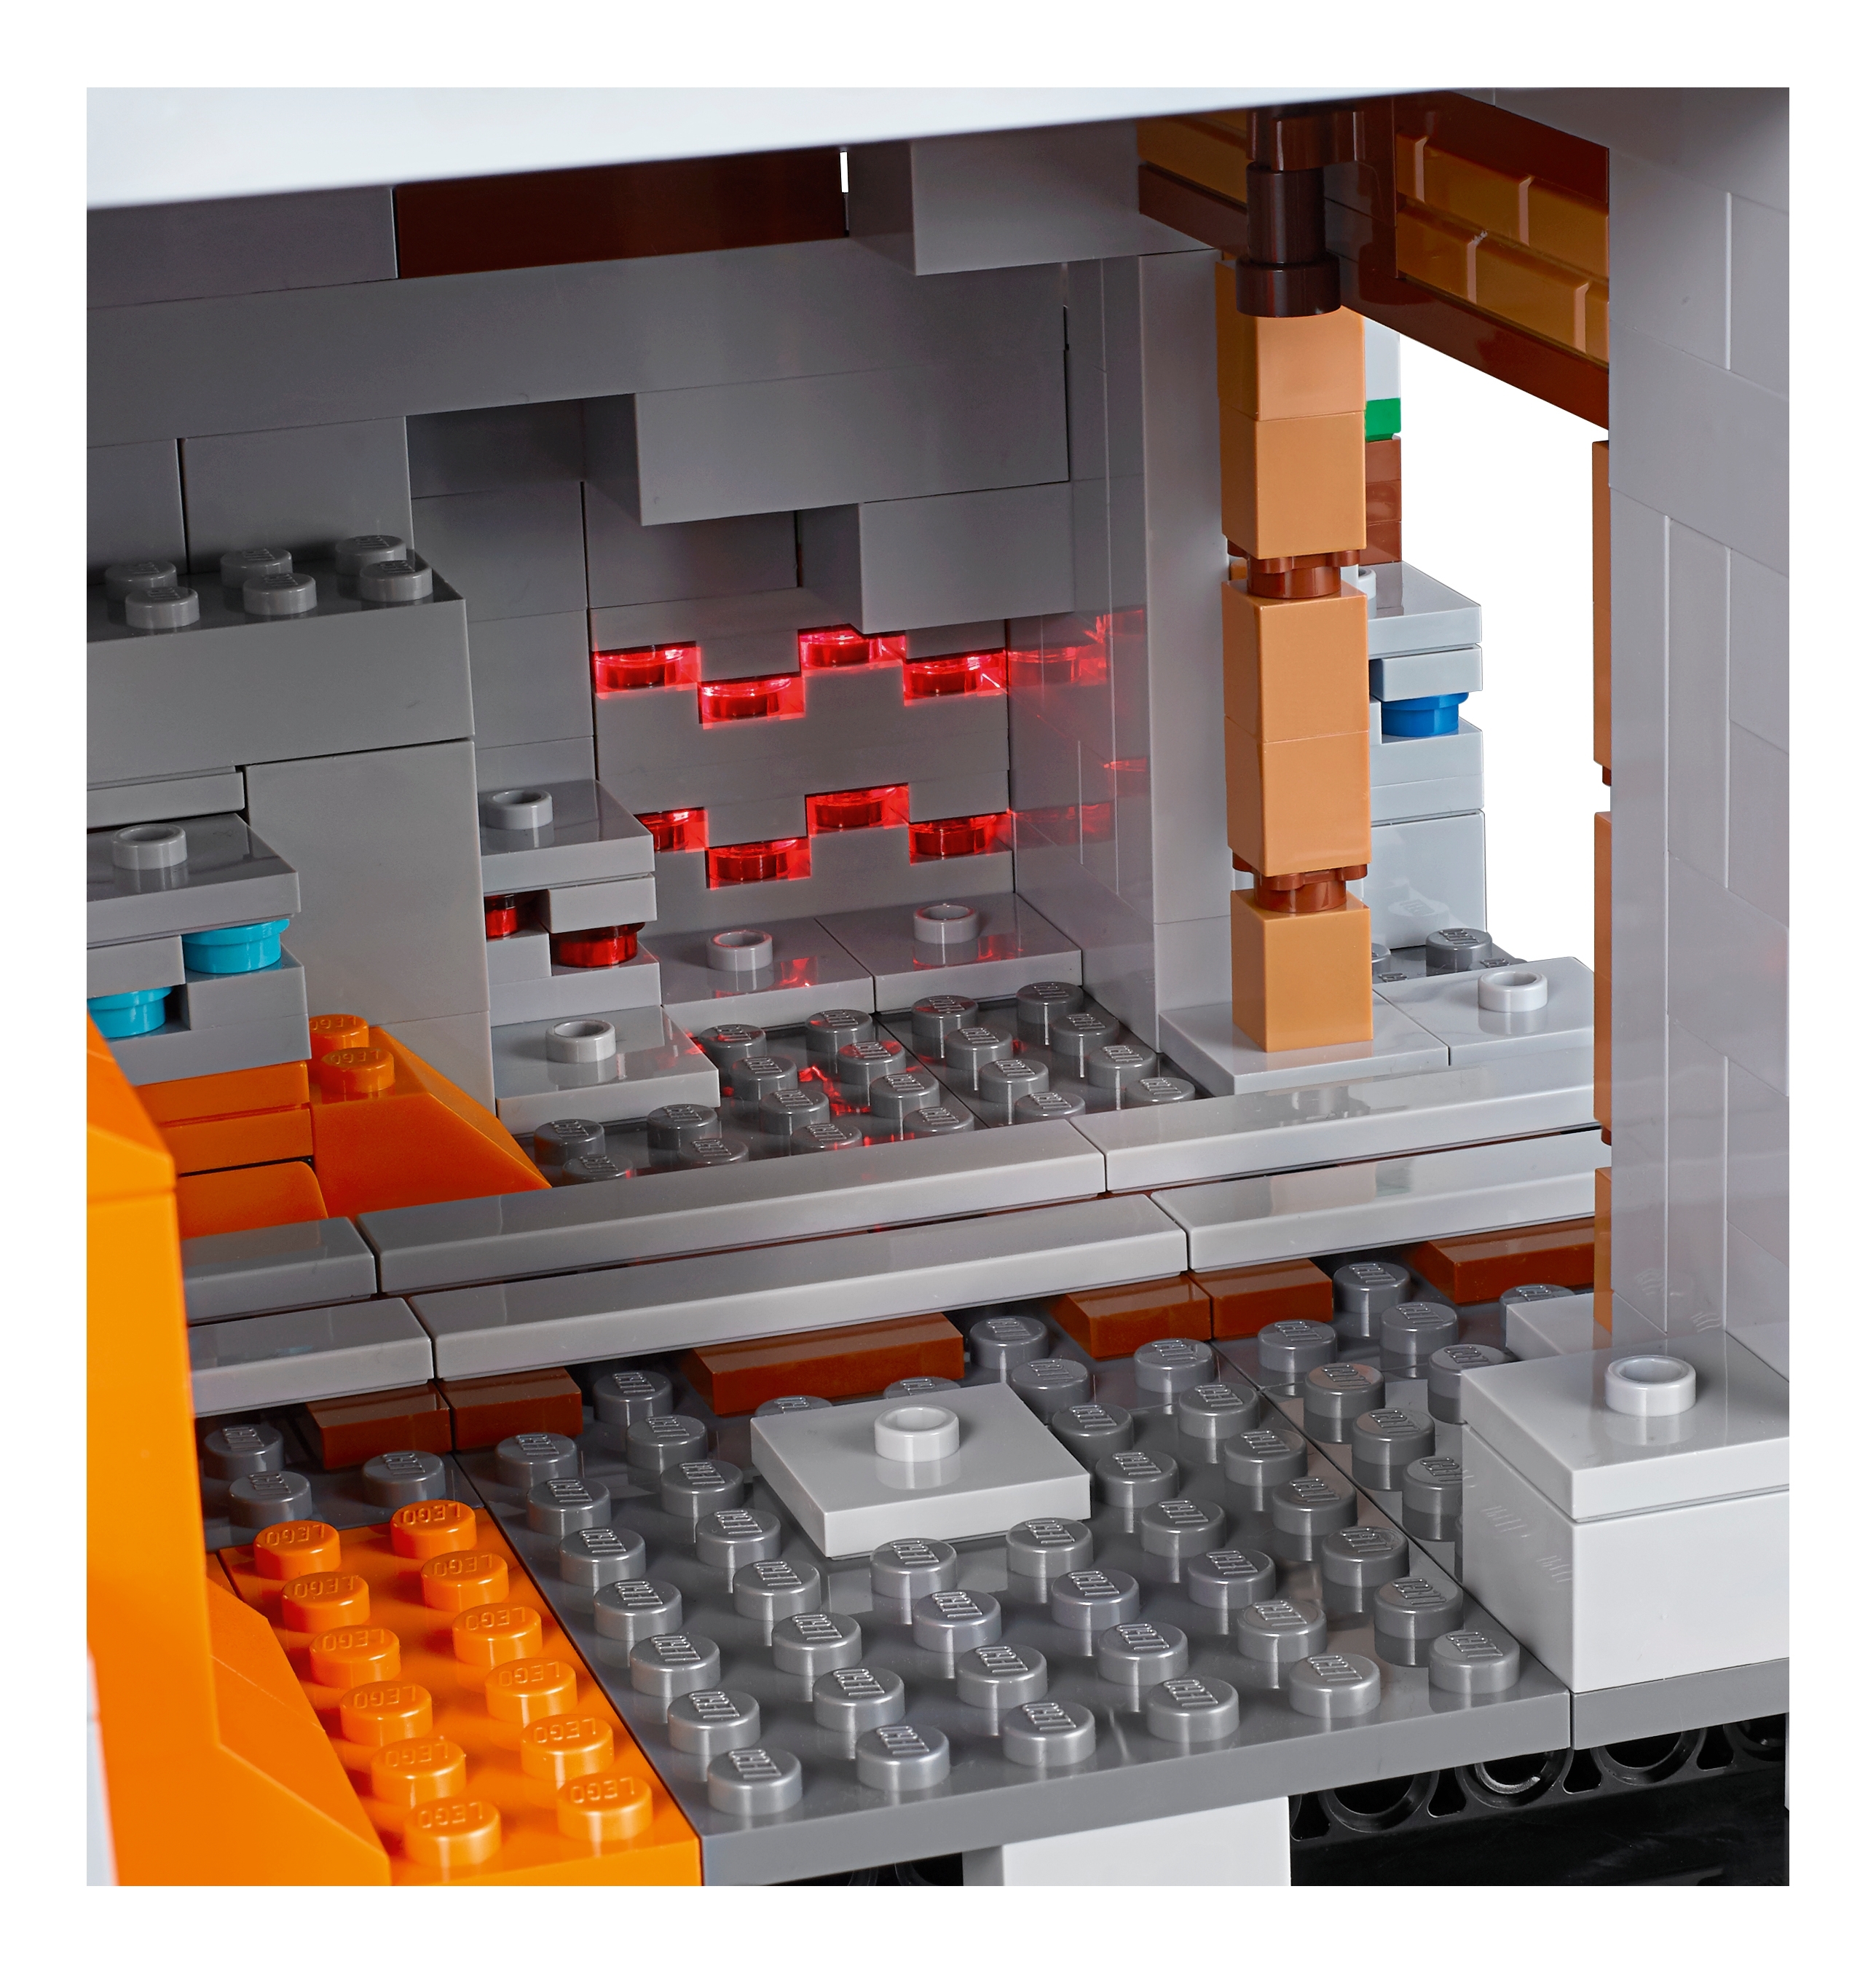 Lego minecraft mountain cave price,the mountain cave